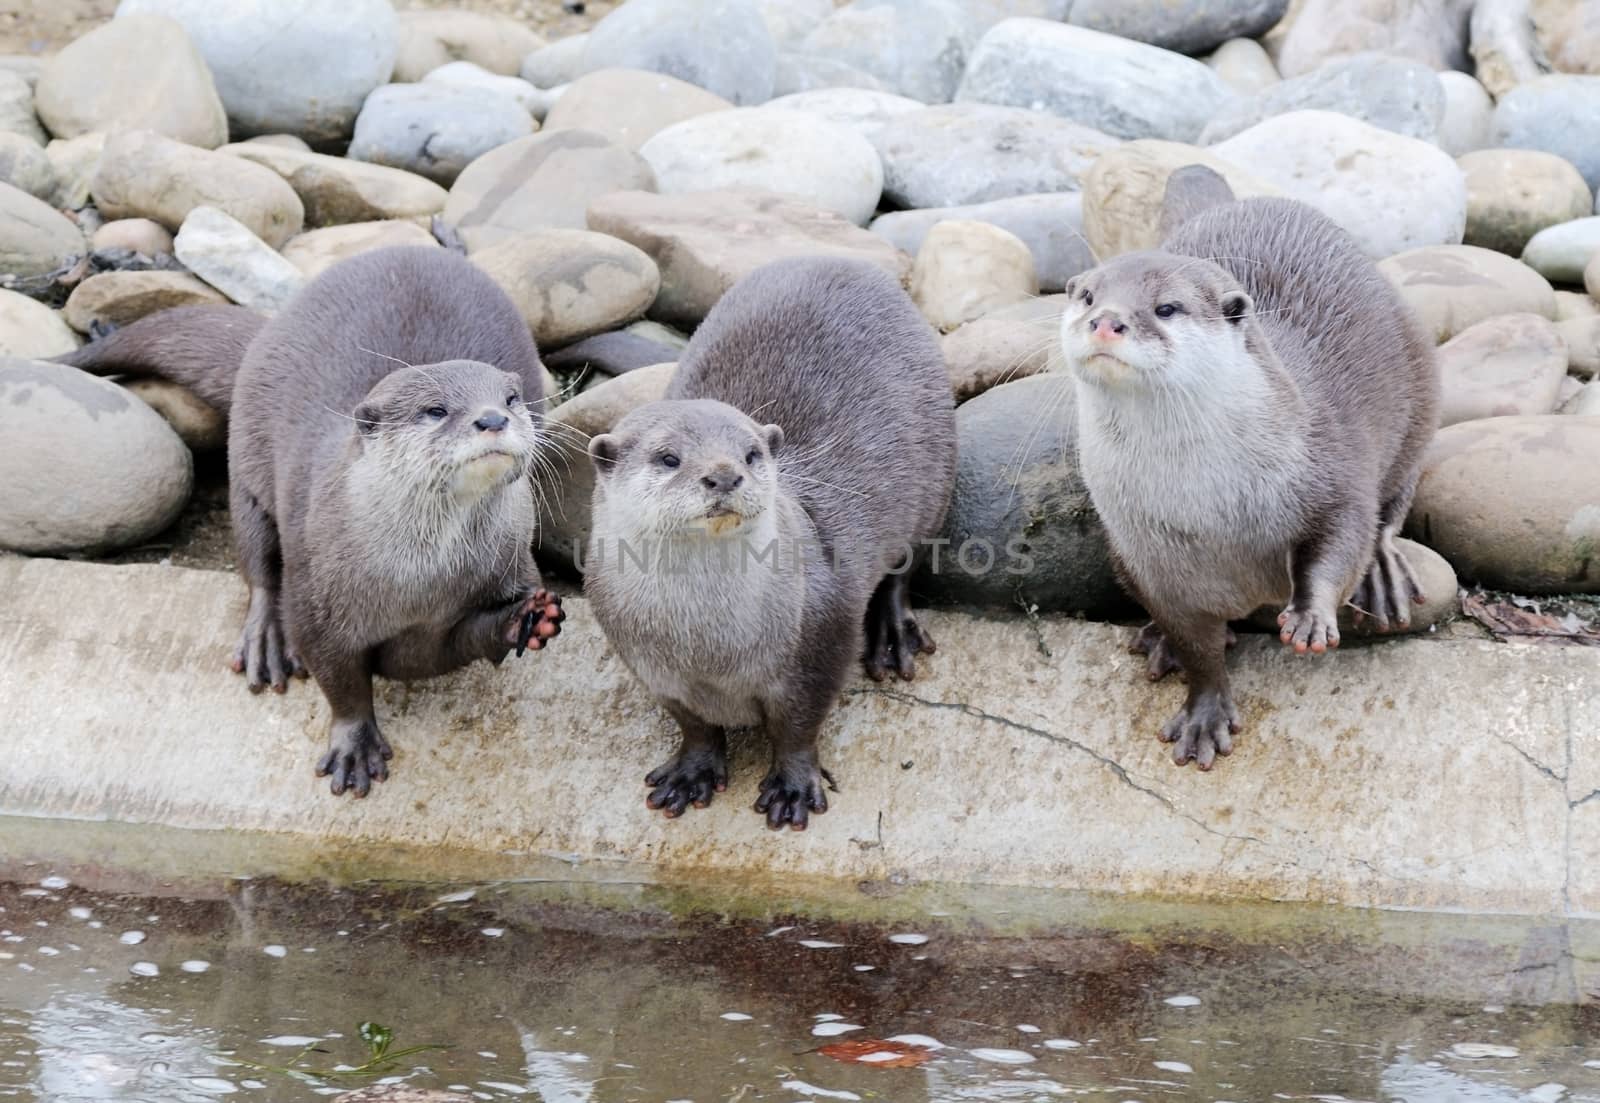 Three cute otters by the water edge